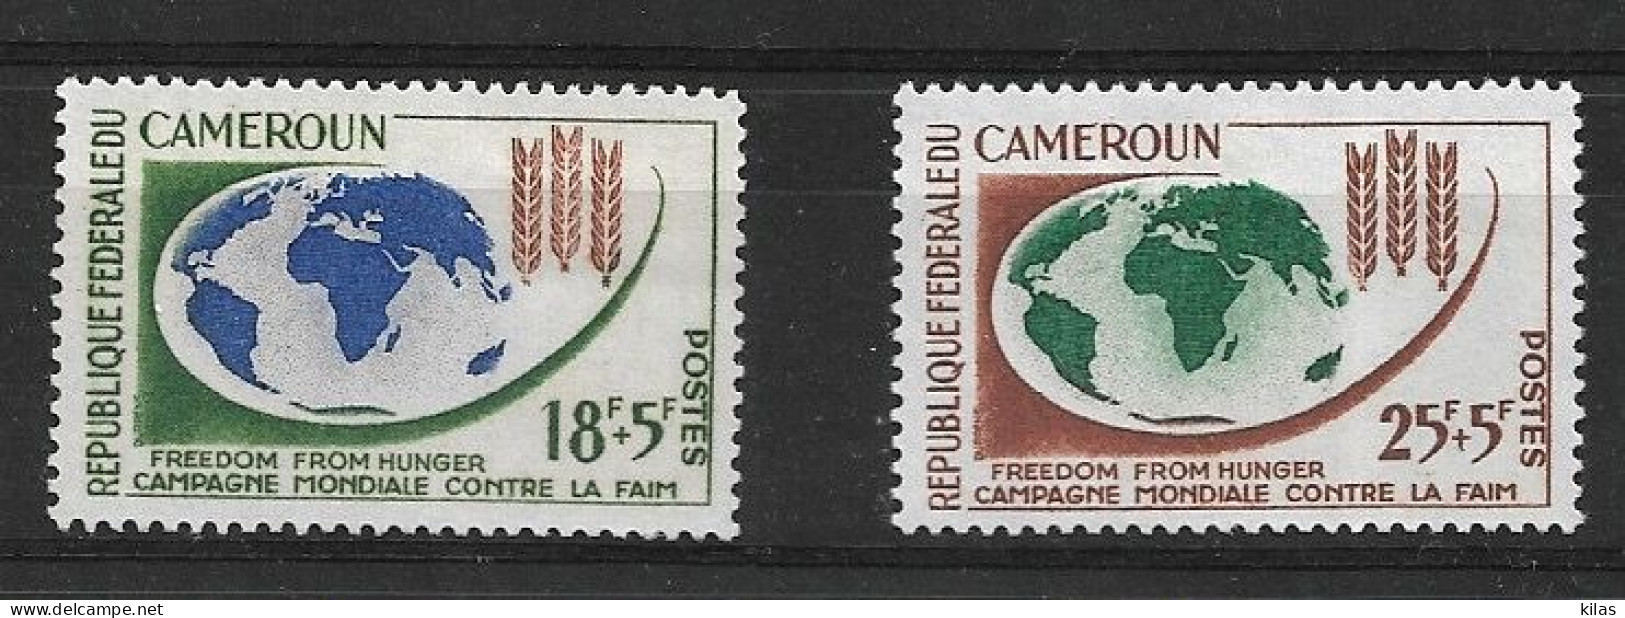 CAMEROON 1963 FREEDOM FROM HUNGER MNH - Food